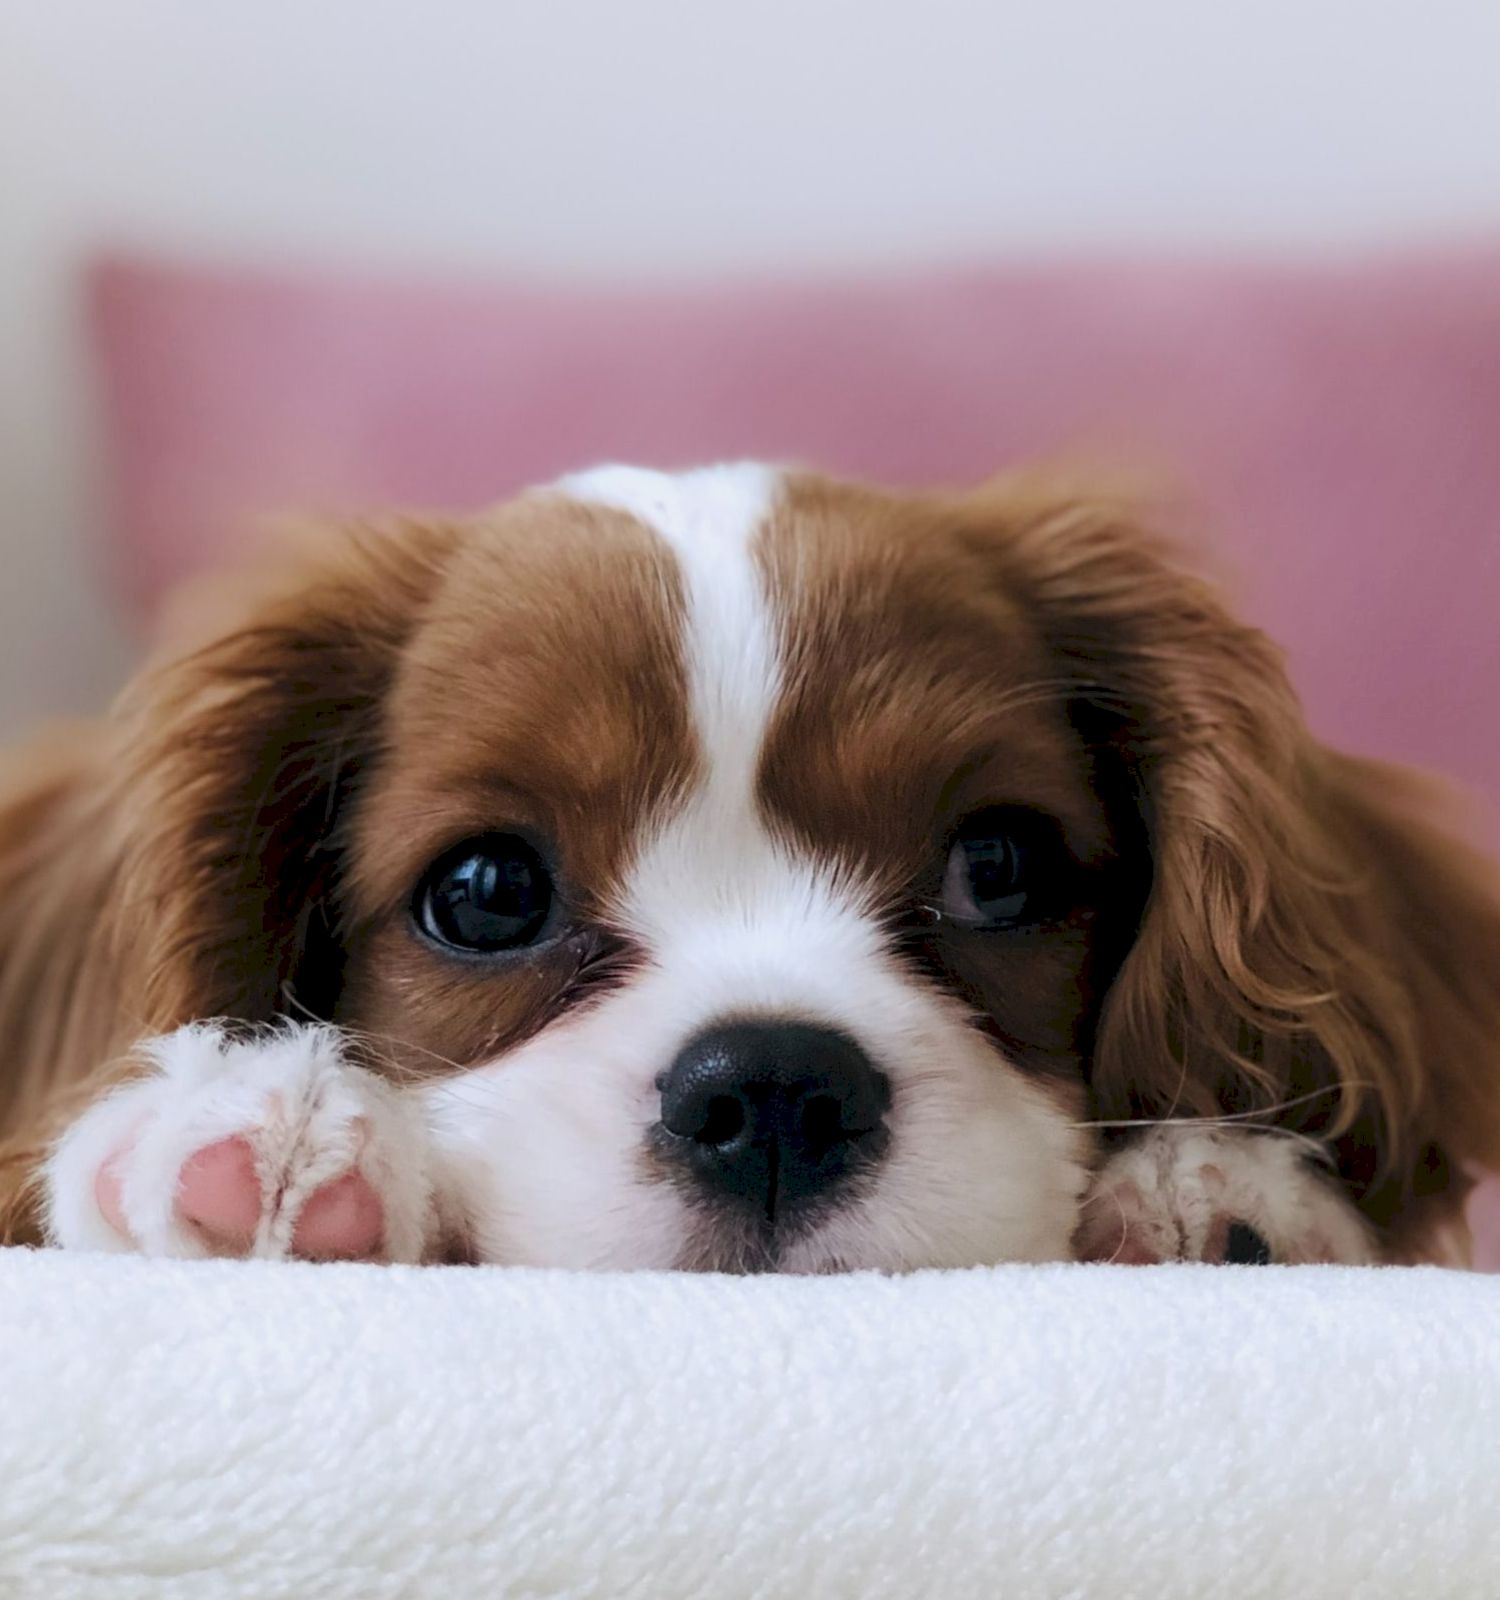 The image shows an adorable brown and white puppy resting its head on a soft surface, with a blurred pink pillow in the background.